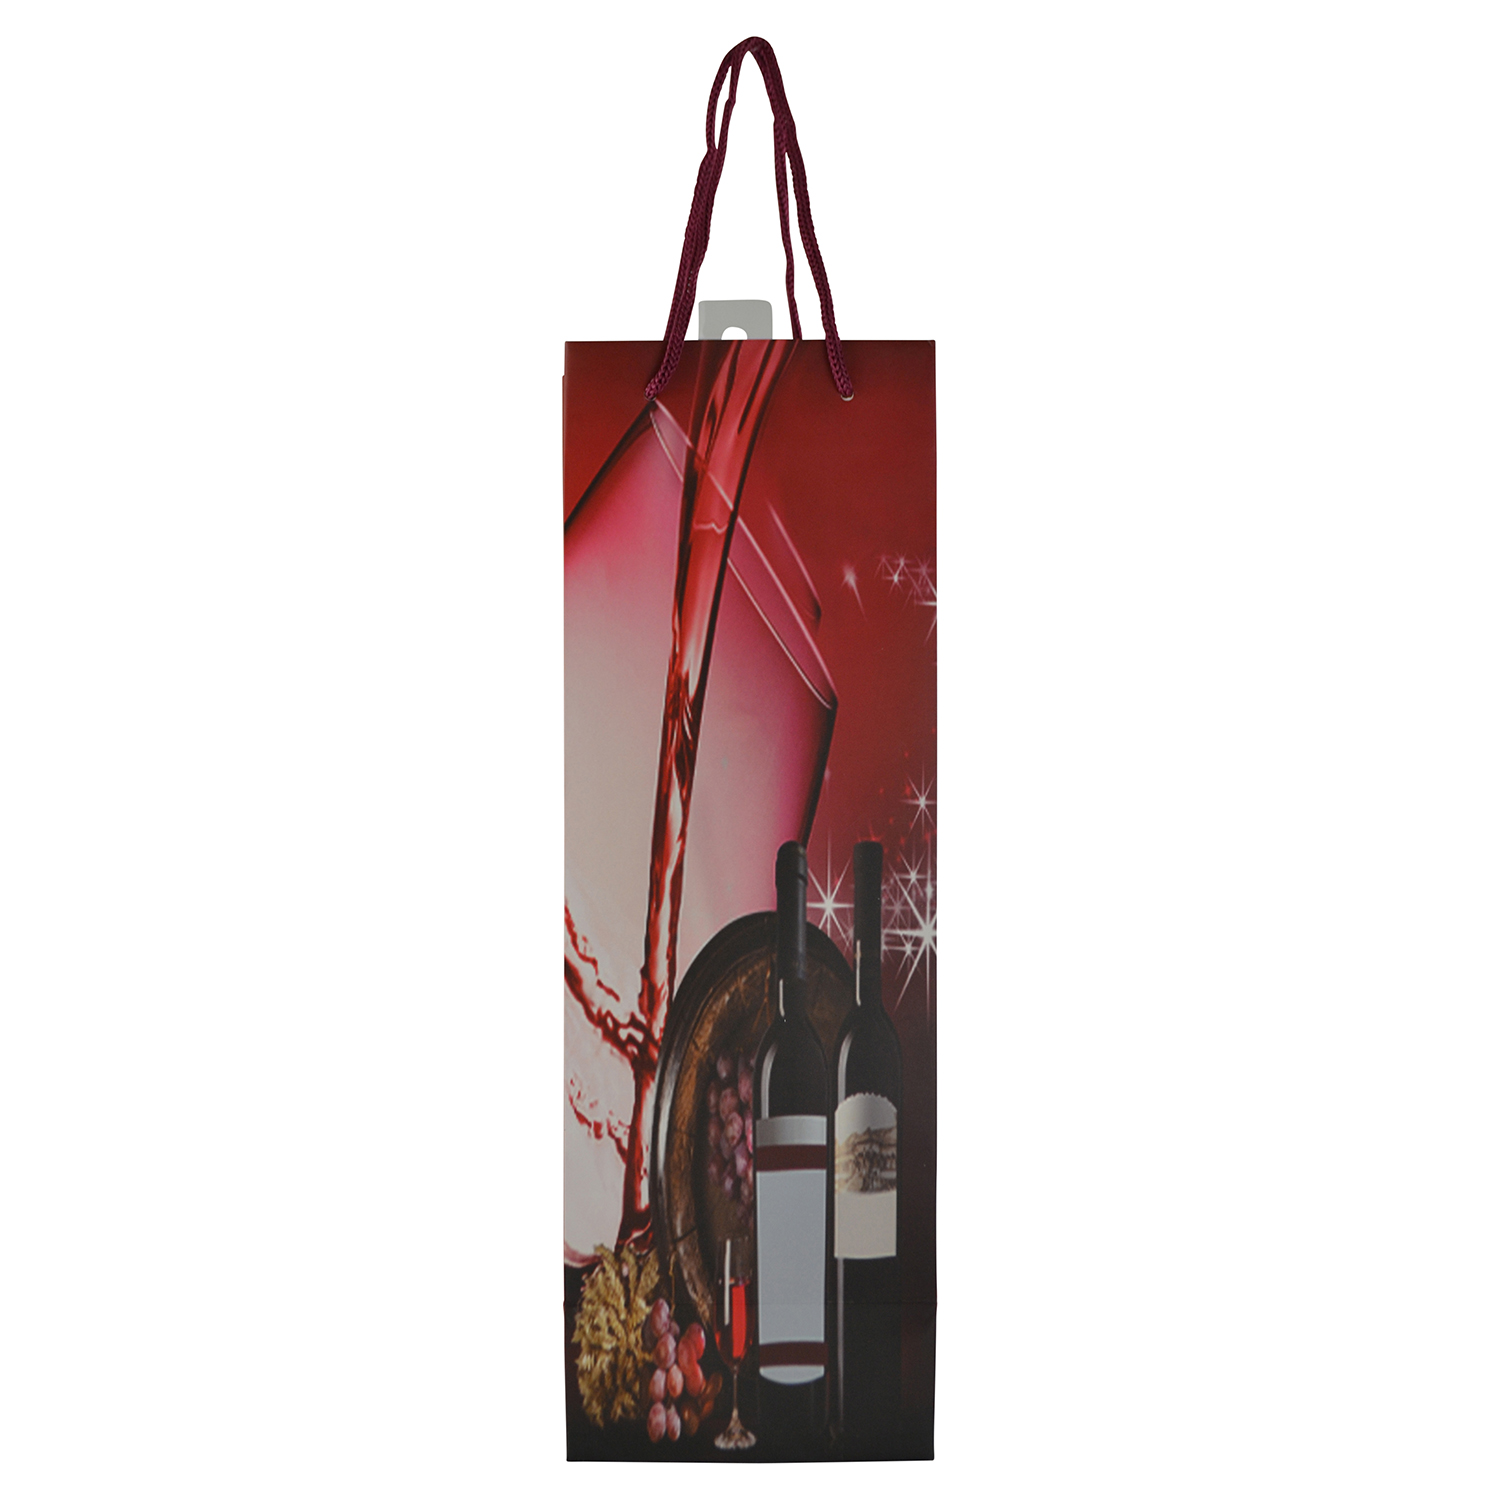 14" WINE BAG, RED WINE POURING IN GLASS